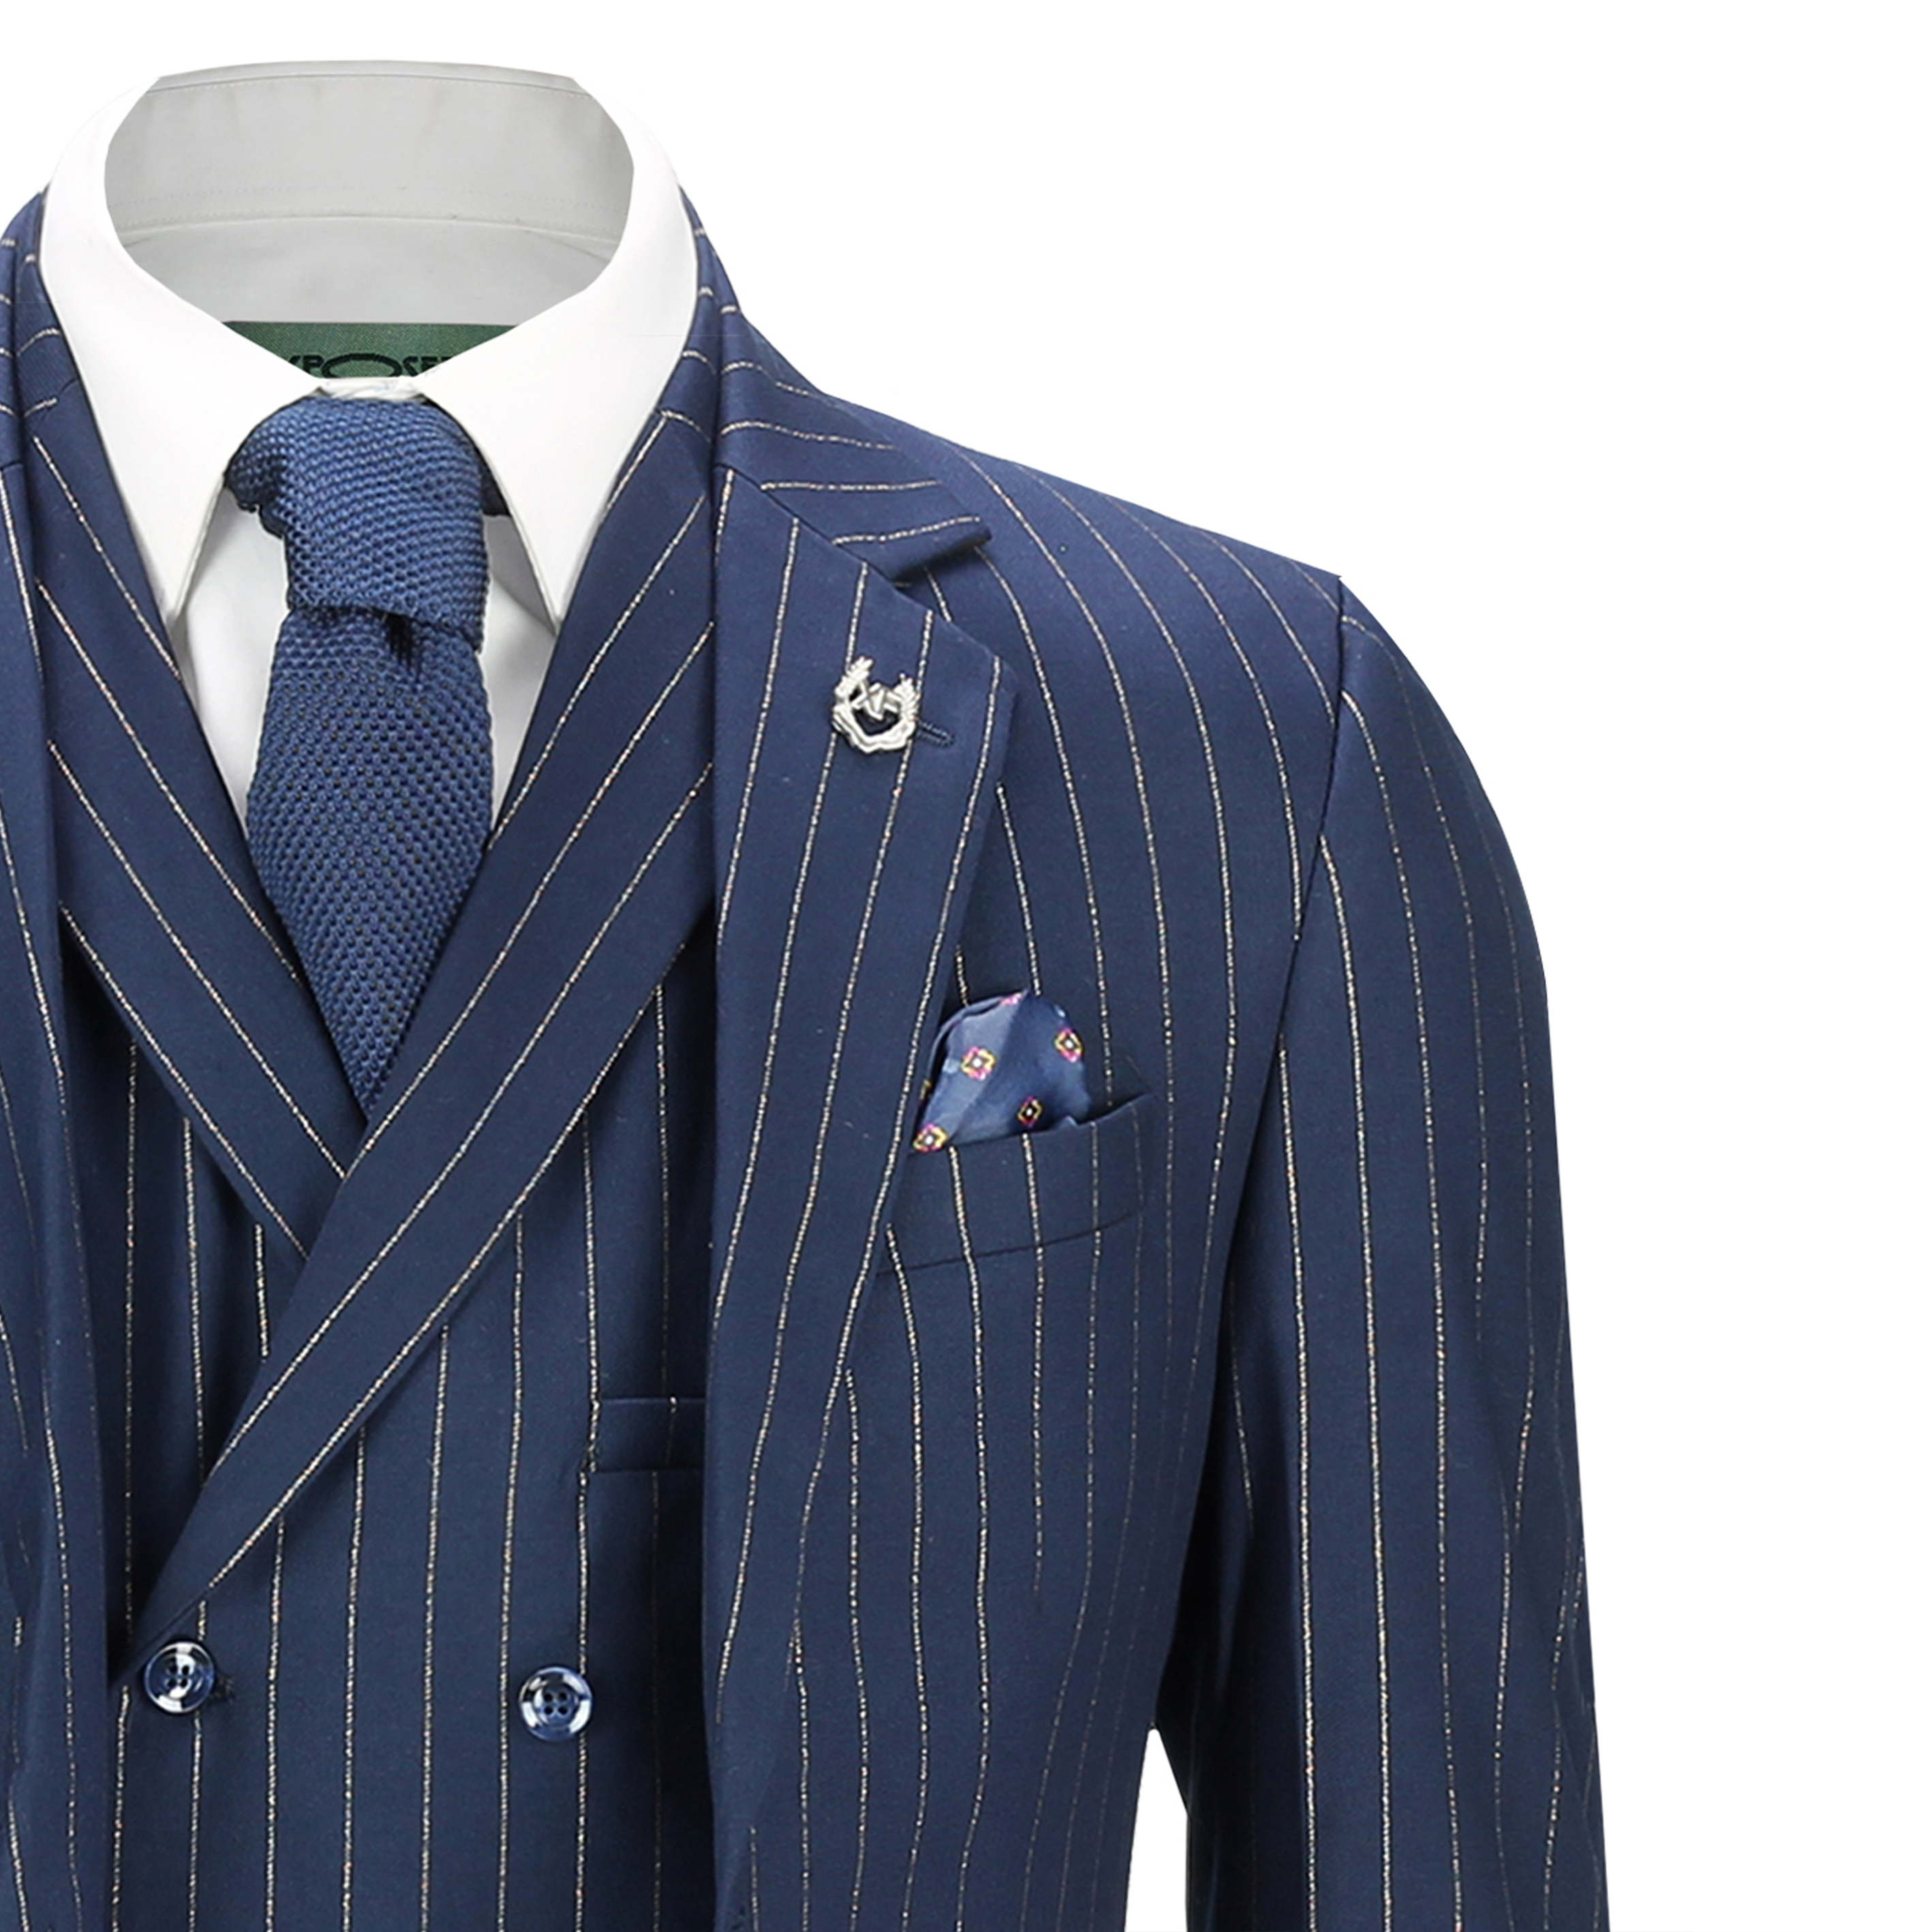 NEIL - NAVY DOUBLE BREASTED GOLD PINSTRIPE JACKET